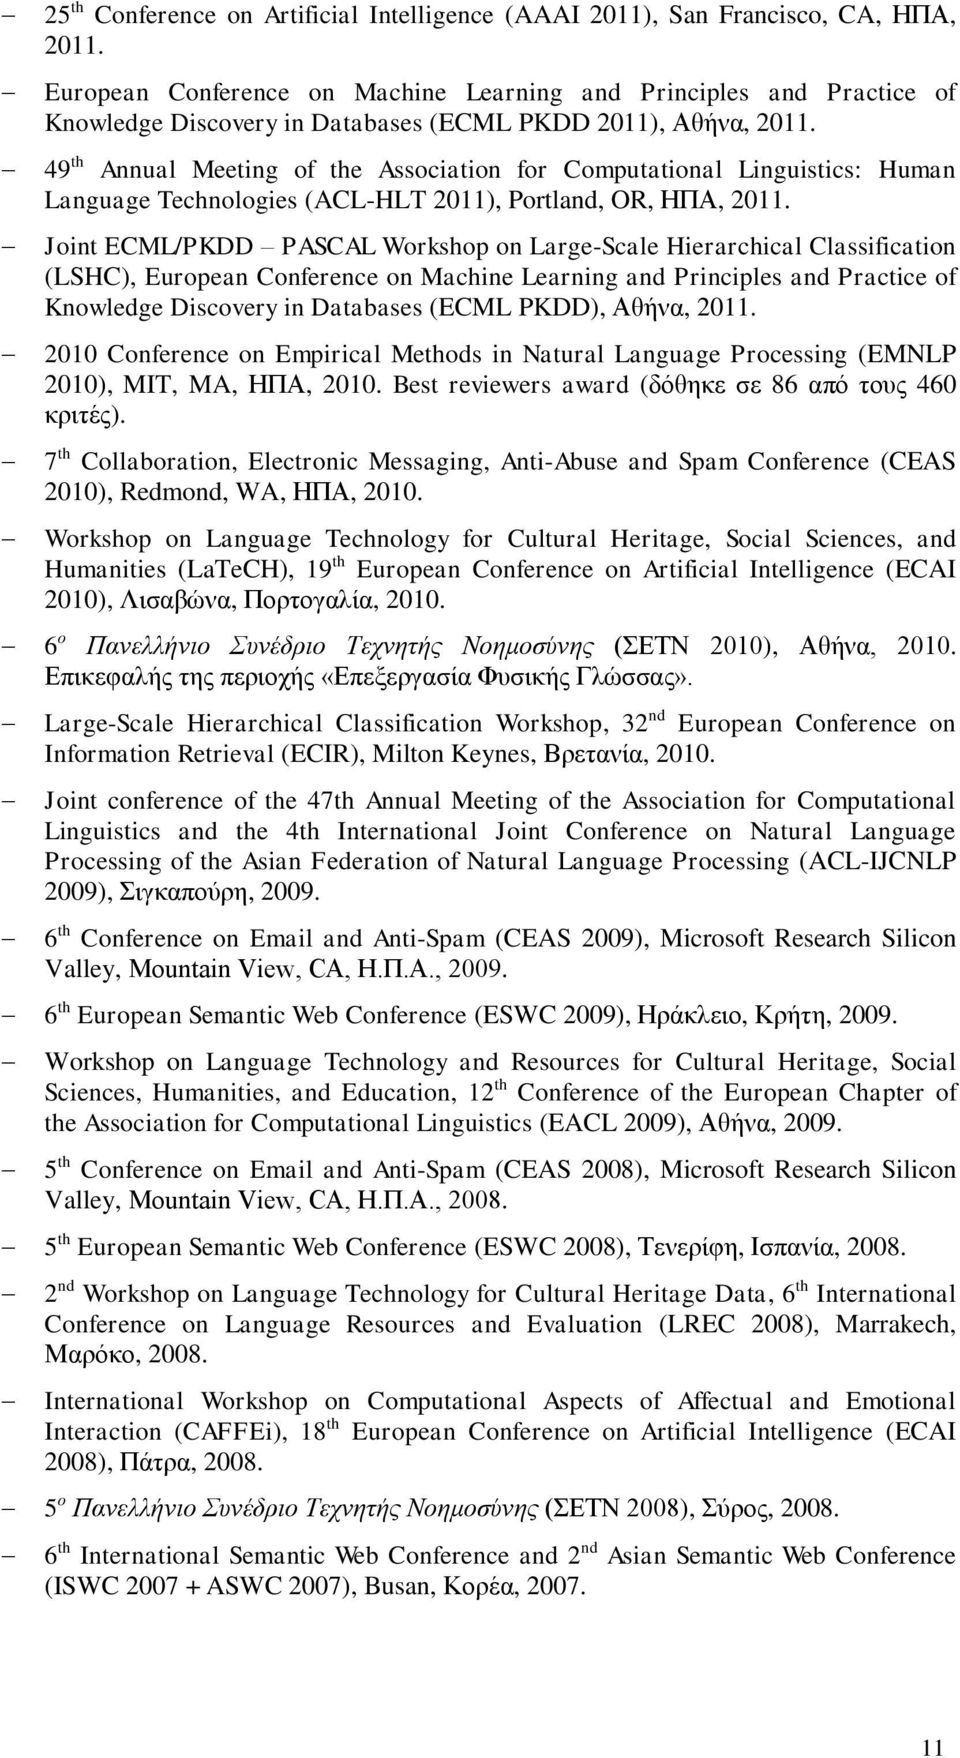 49 th Annual Meeting of the Association for Computational Linguistics: Human Language Technologies (ACL-HLT 2011), Portland, OR, ΗΠΑ, 2011.